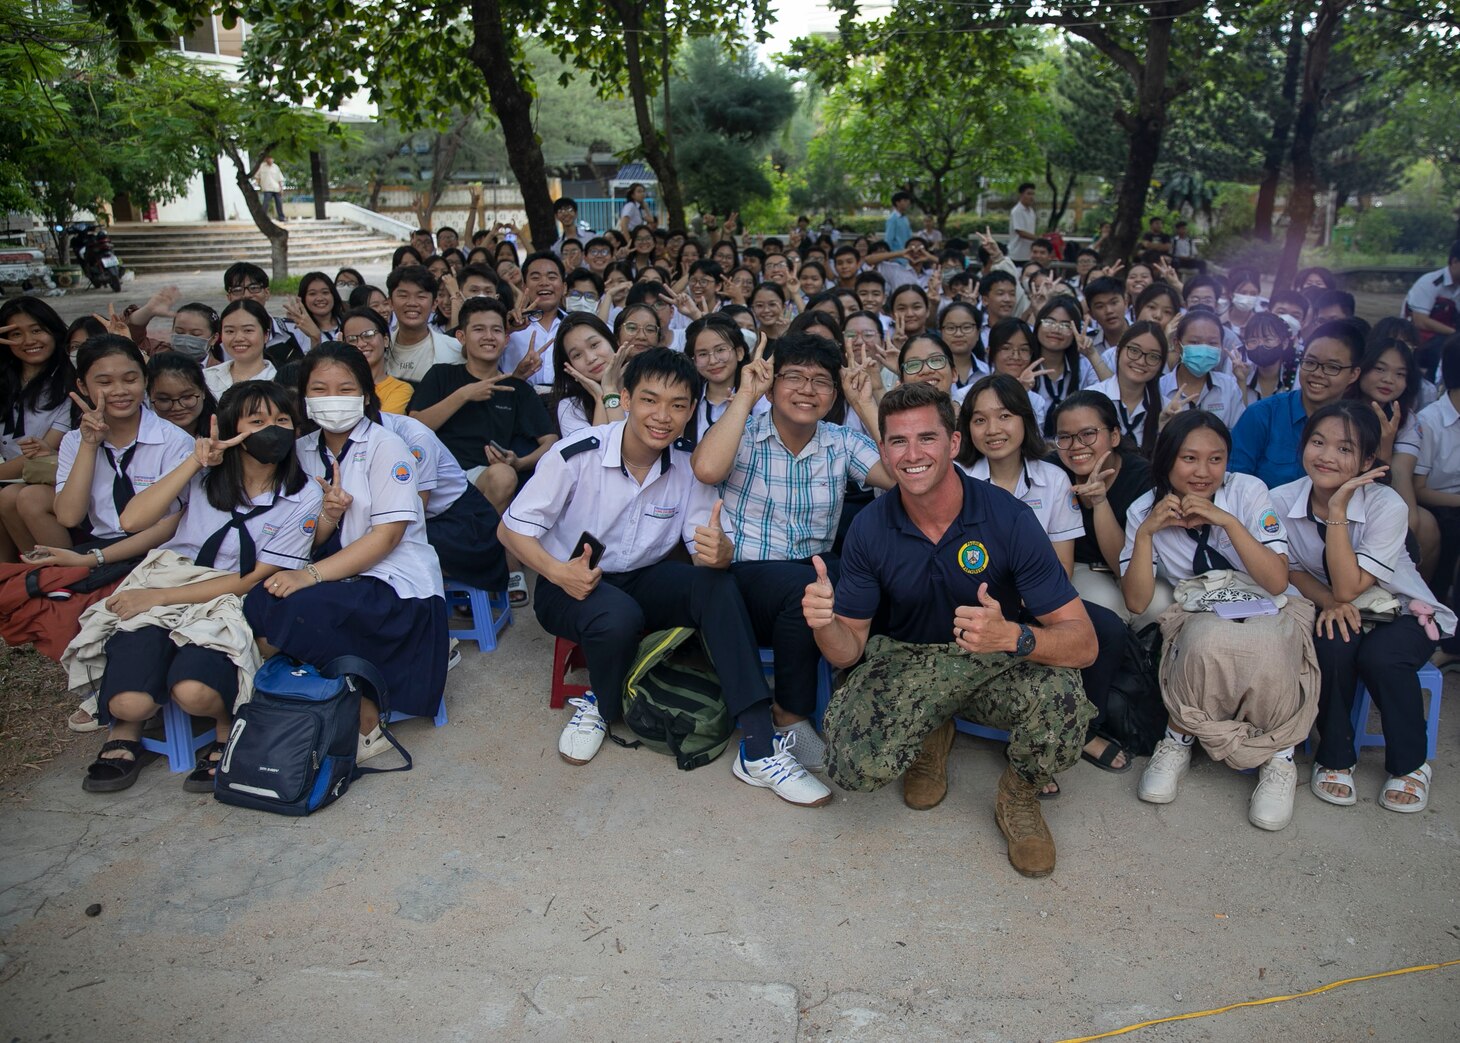 Lt. Jackson Welch, Pacific Partnership 2023 legal officer, poses for a photo with students from the Luong Van Chanh School before a concert featuring the Pacific Partnership 2023 Band and students from the school, Aug. 14. Now in its 18th year, Pacific Partnership is the largest annual multinational humanitarian assistance and disaster relief preparedness mission conducted in the Indo-Pacific.